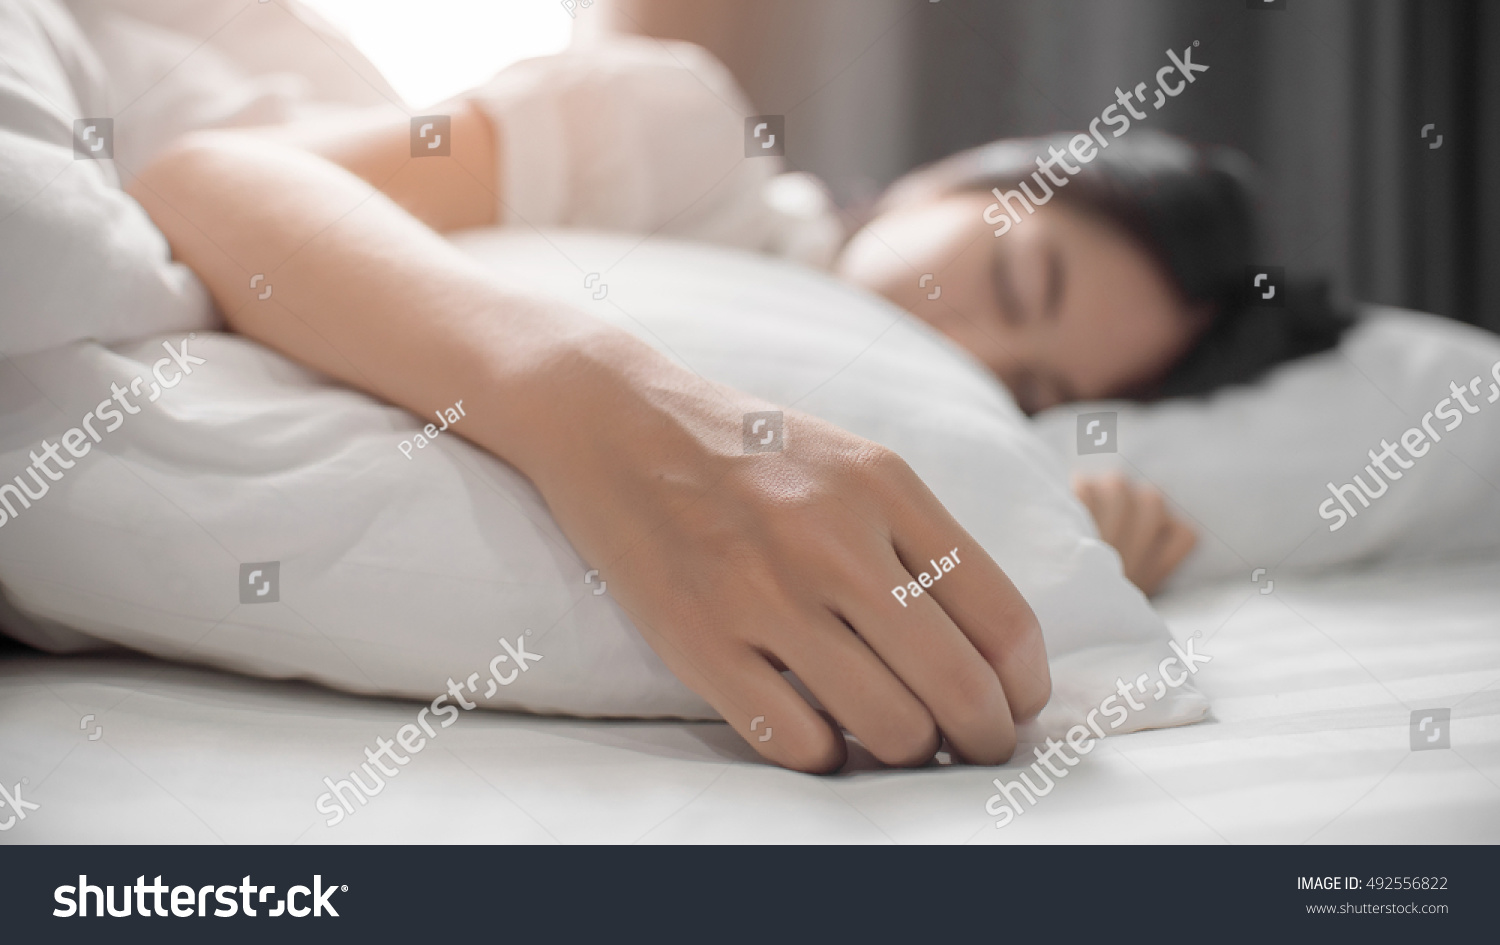 Cute girl on a soft white bed. She sleeping and relaxing. #492556822